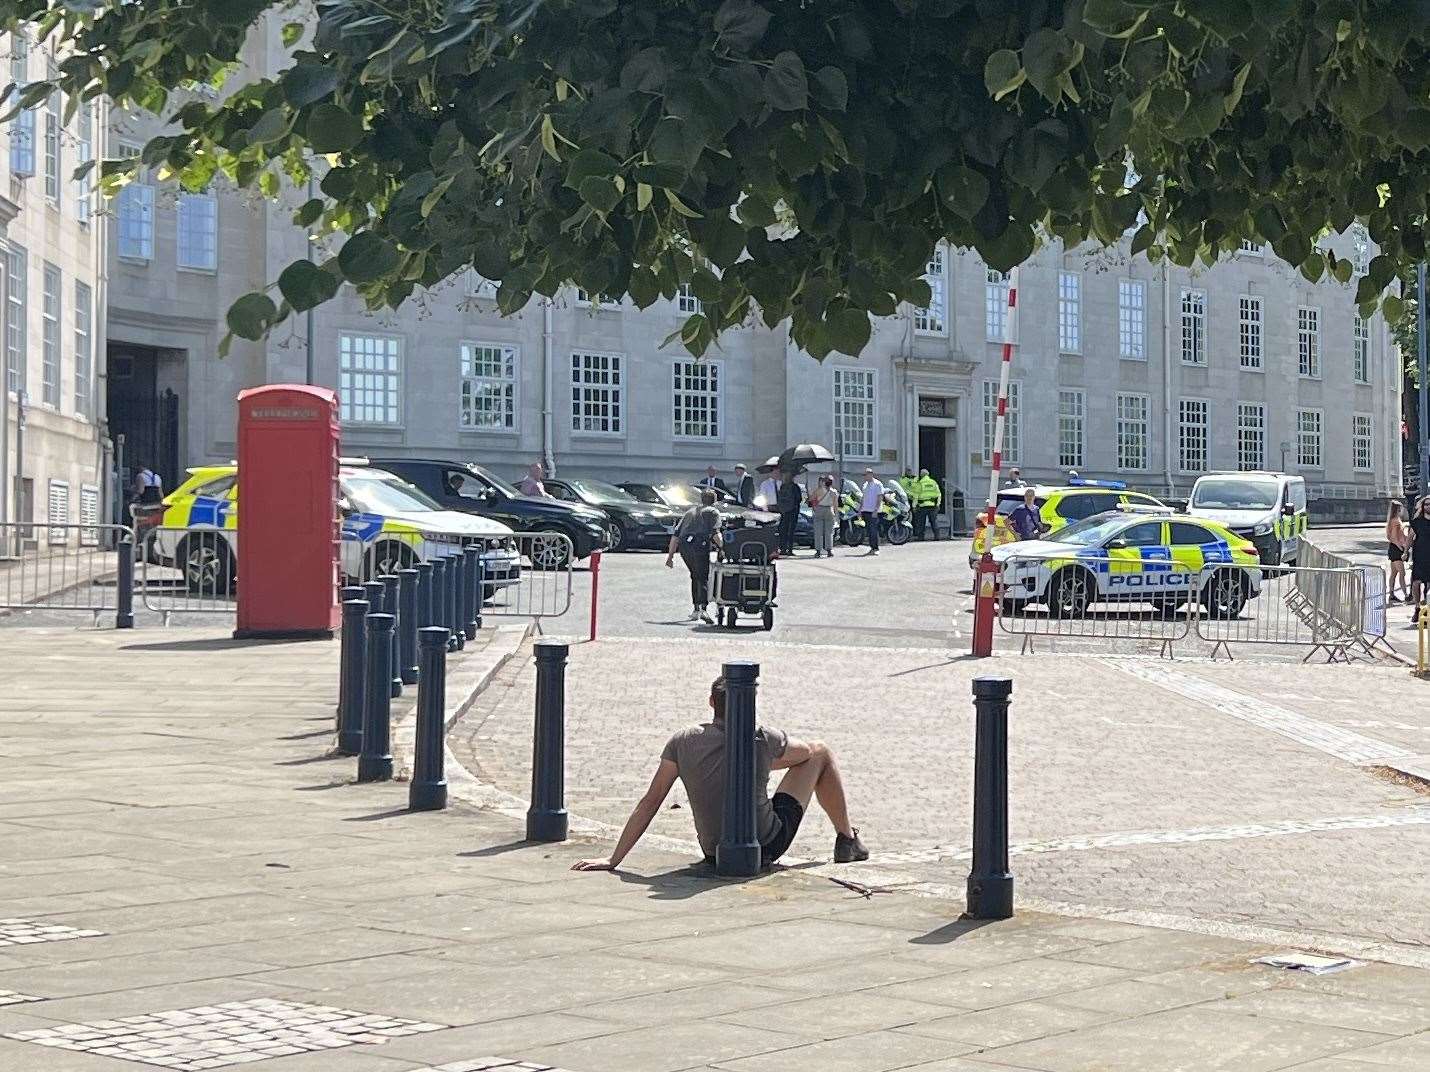 Film crews and prop police cars are in Maidstone for a new Netflix drama